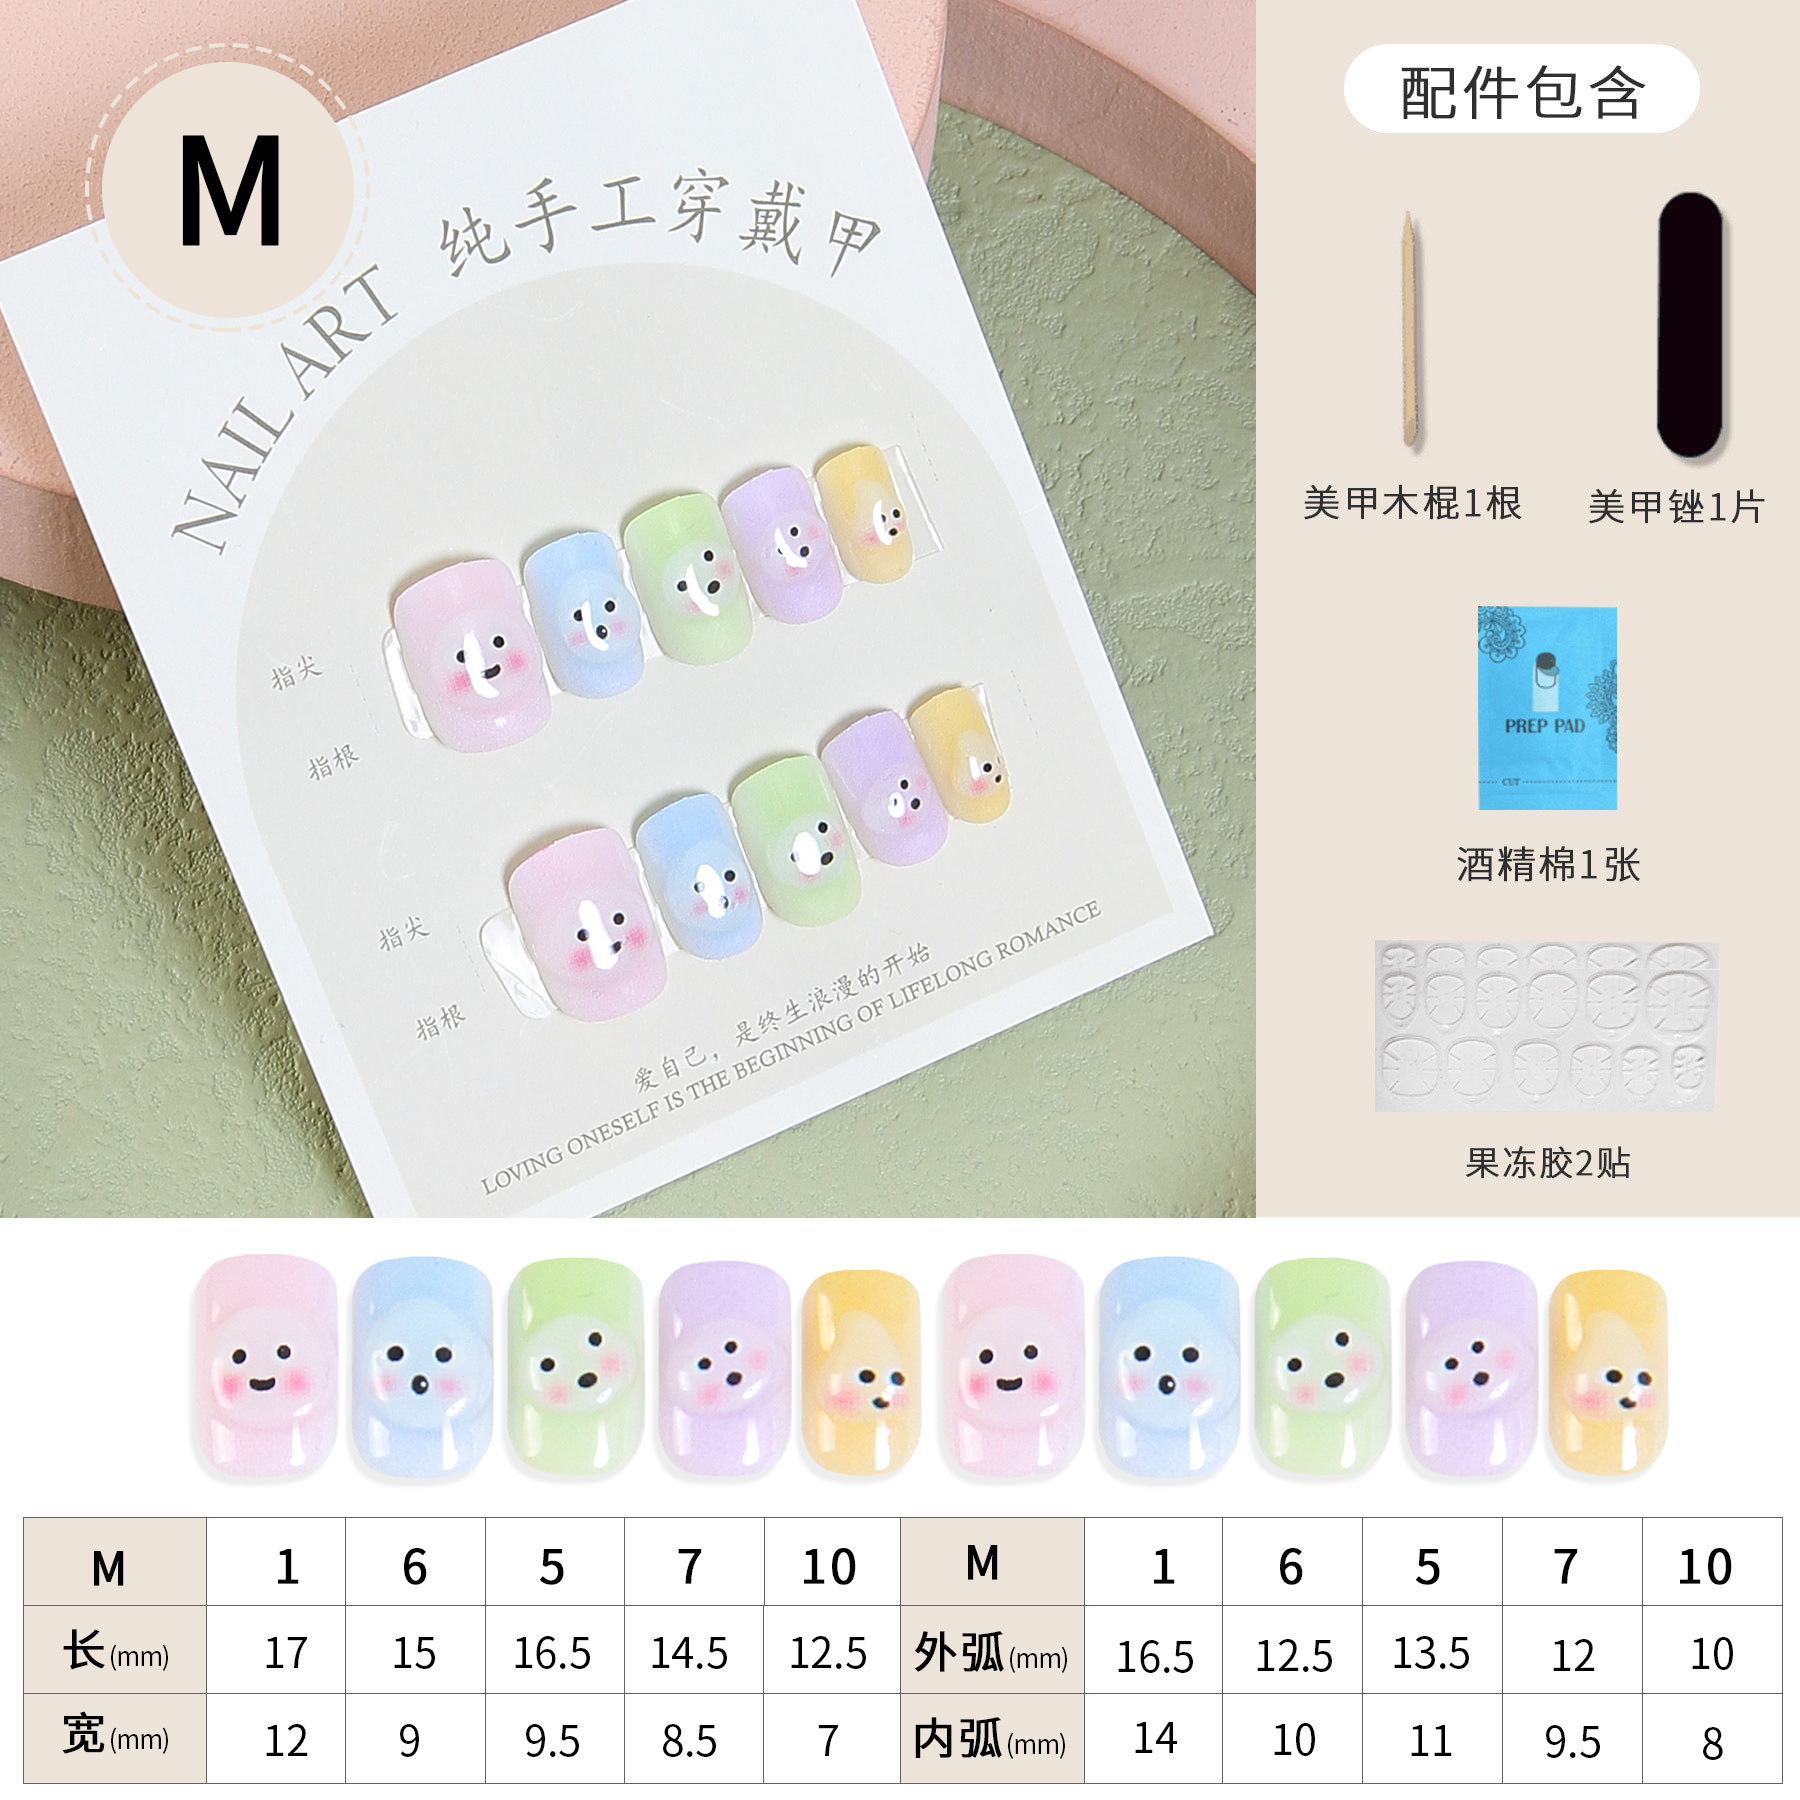 Xiaohongshu Hot Selling Handmade Wear Armor Cute Facial Expression Bag Japanese Style Nail Beauty Patch Crystal Relief Fake Nail Tip